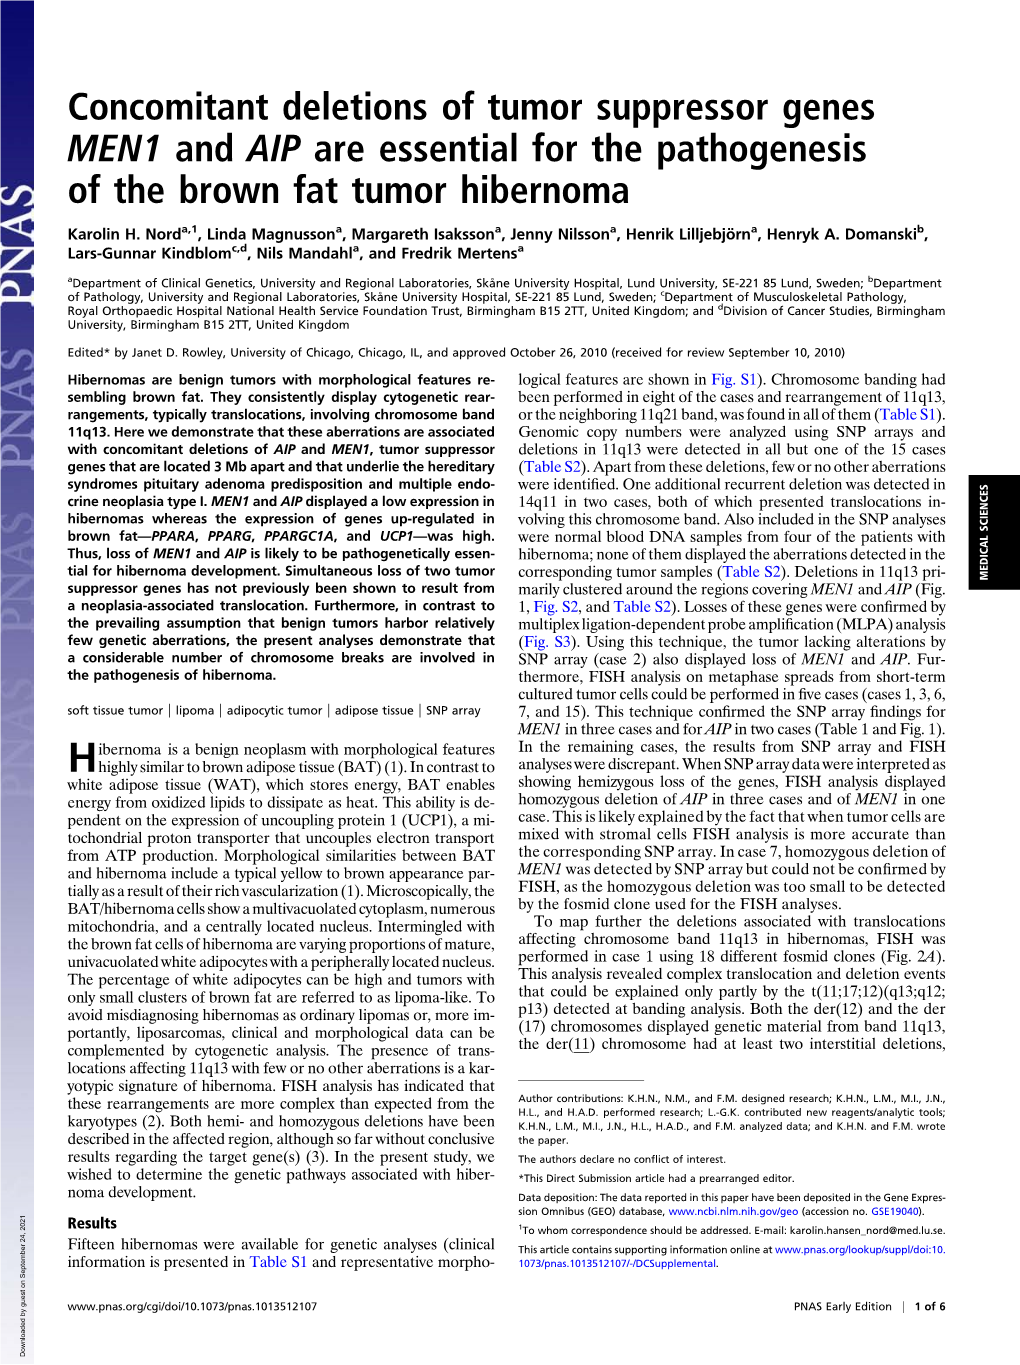 Concomitant Deletions of Tumor Suppressor Genes MEN1 and AIP Are Essential for the Pathogenesis of the Brown Fat Tumor Hibernoma